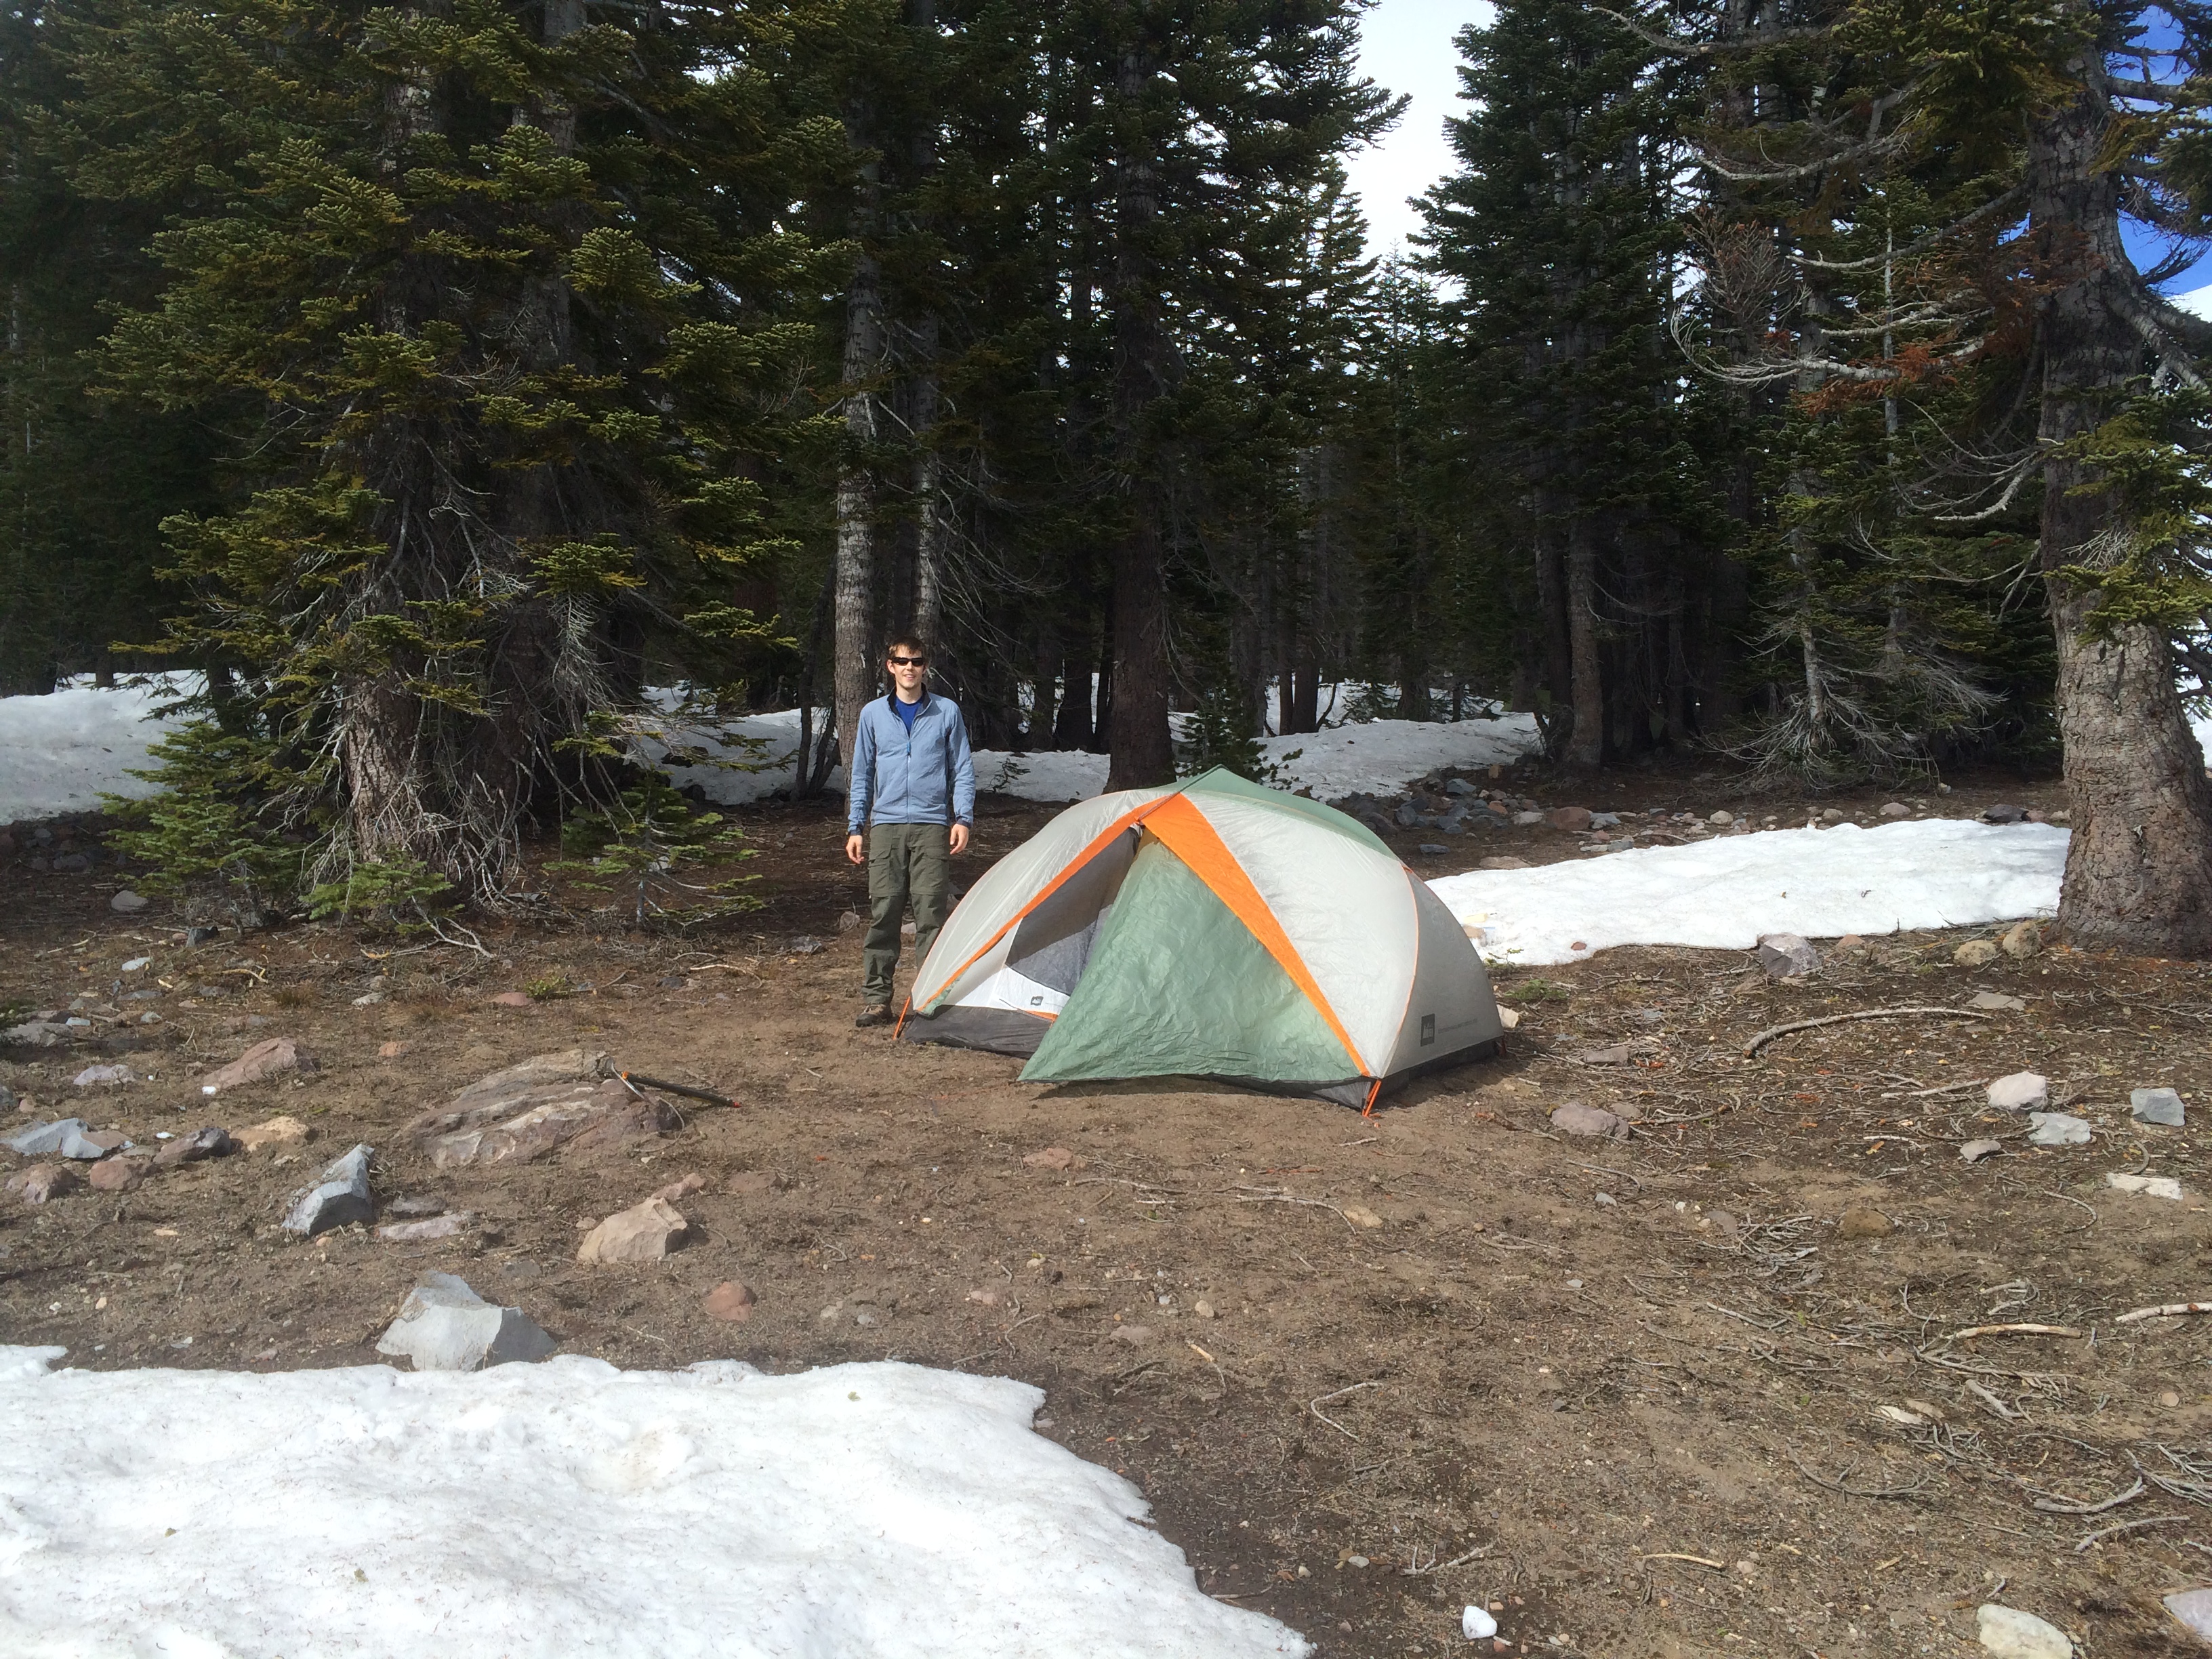 Setting up at Horse Camp (7,900 ft)